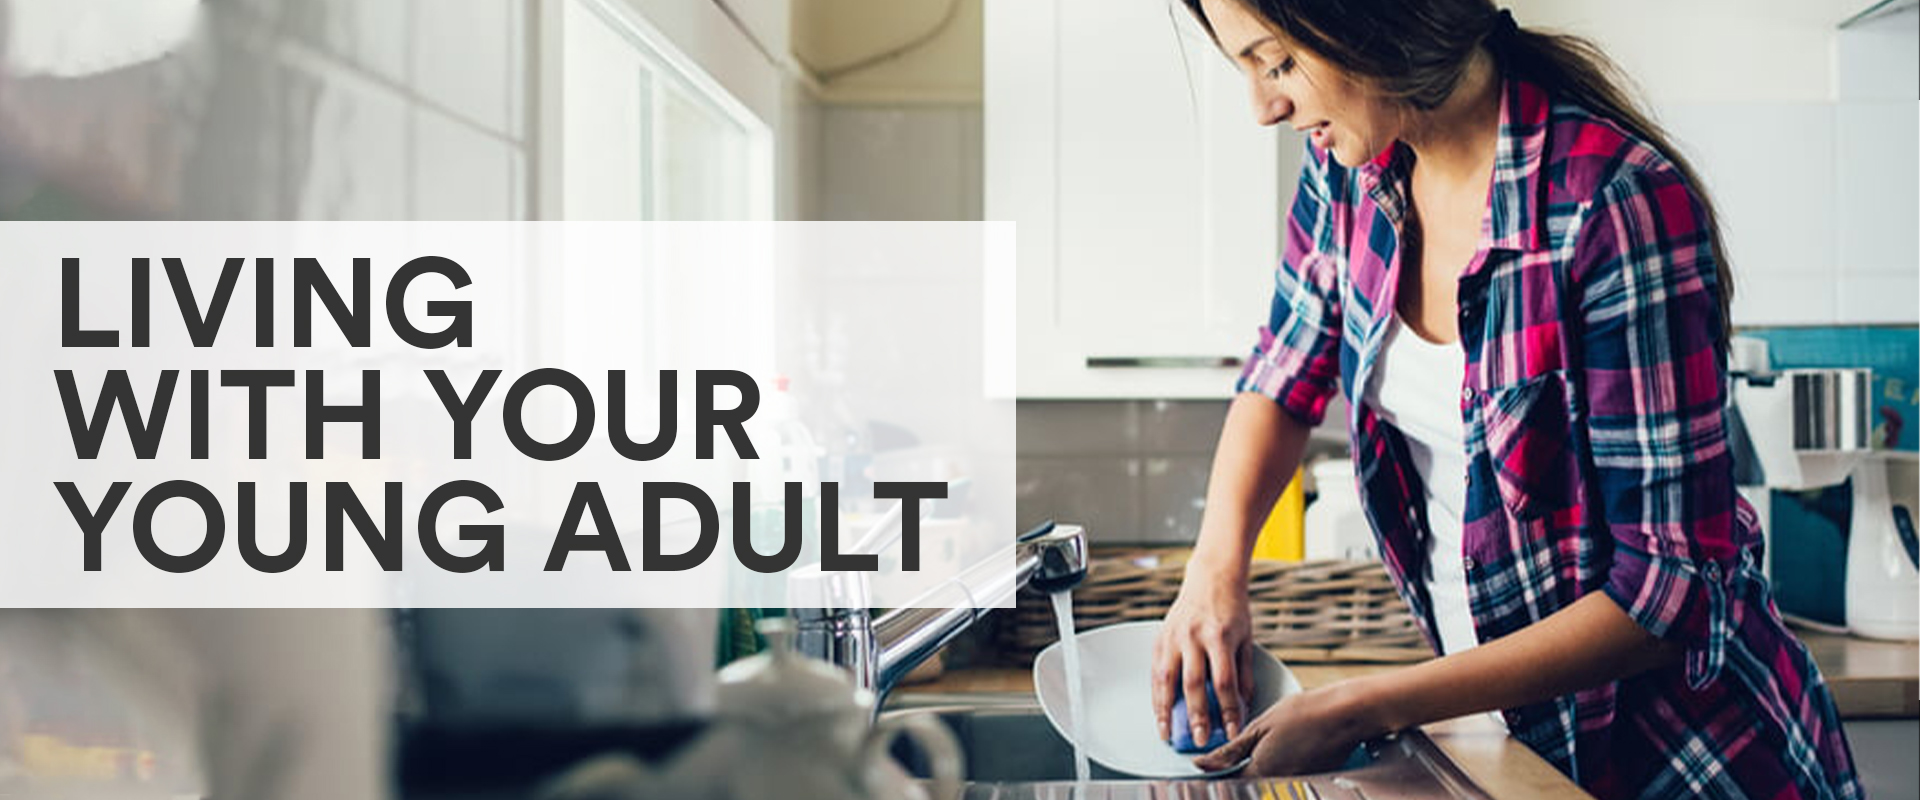 Young woman washing a dish with the text overlay "Living With Your Young Adult"